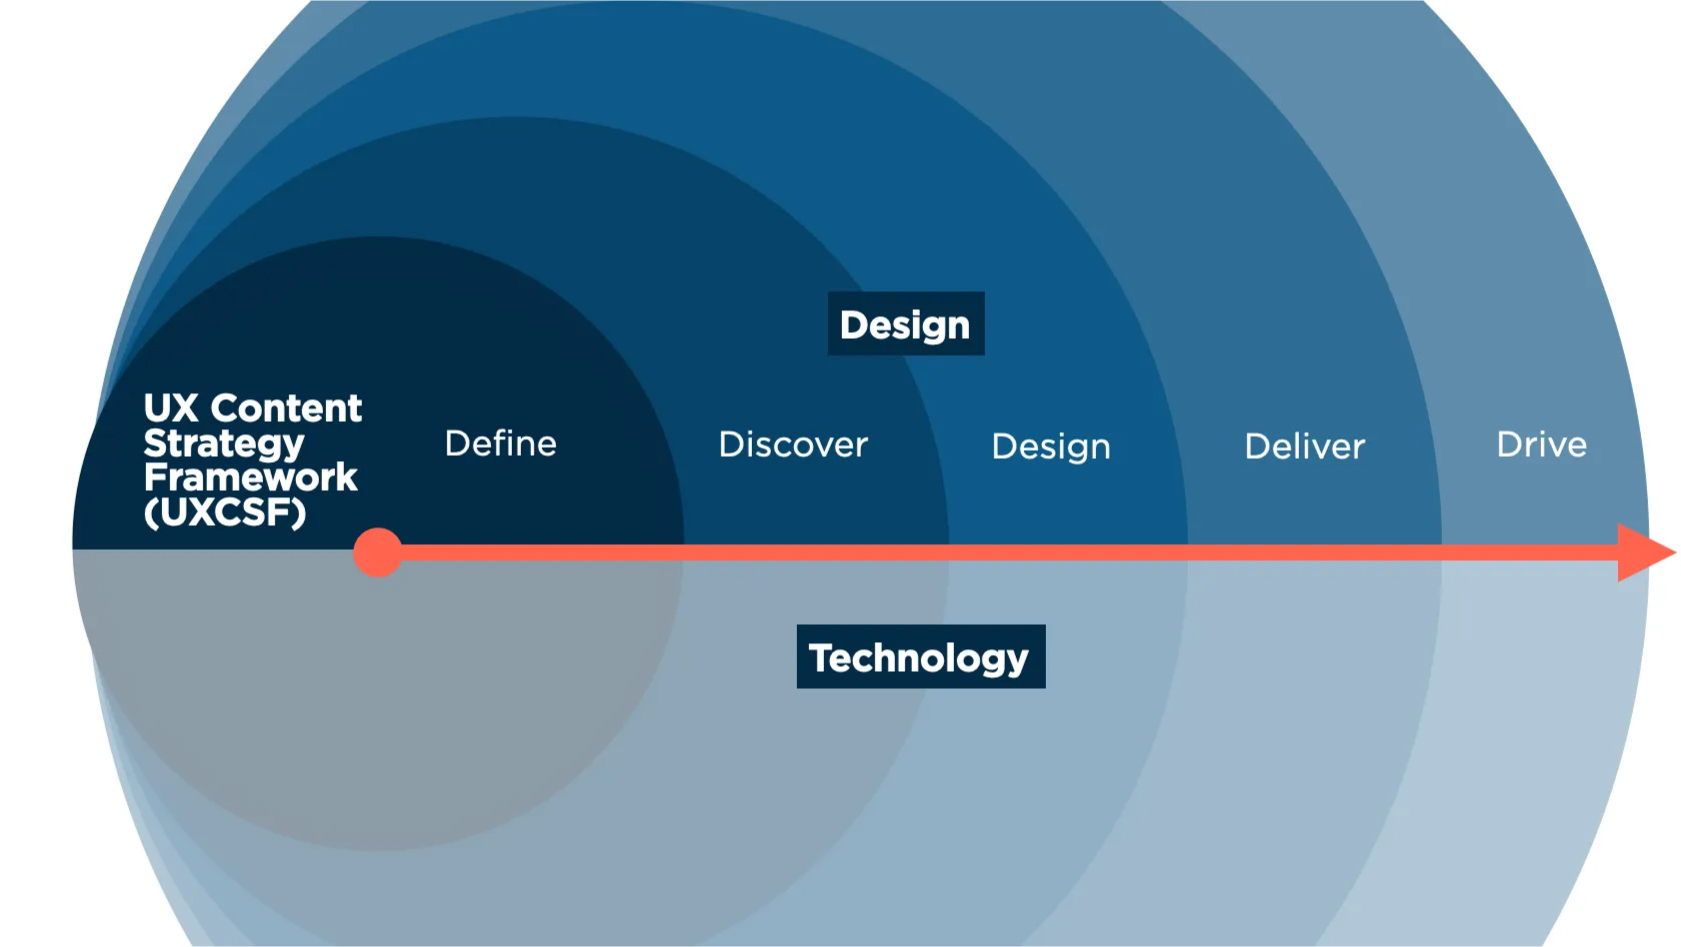 UX Content Strategy Framework (UXCSF) showing the Define, Discover, Design, Deliver and Drive as spheres on a diagram.